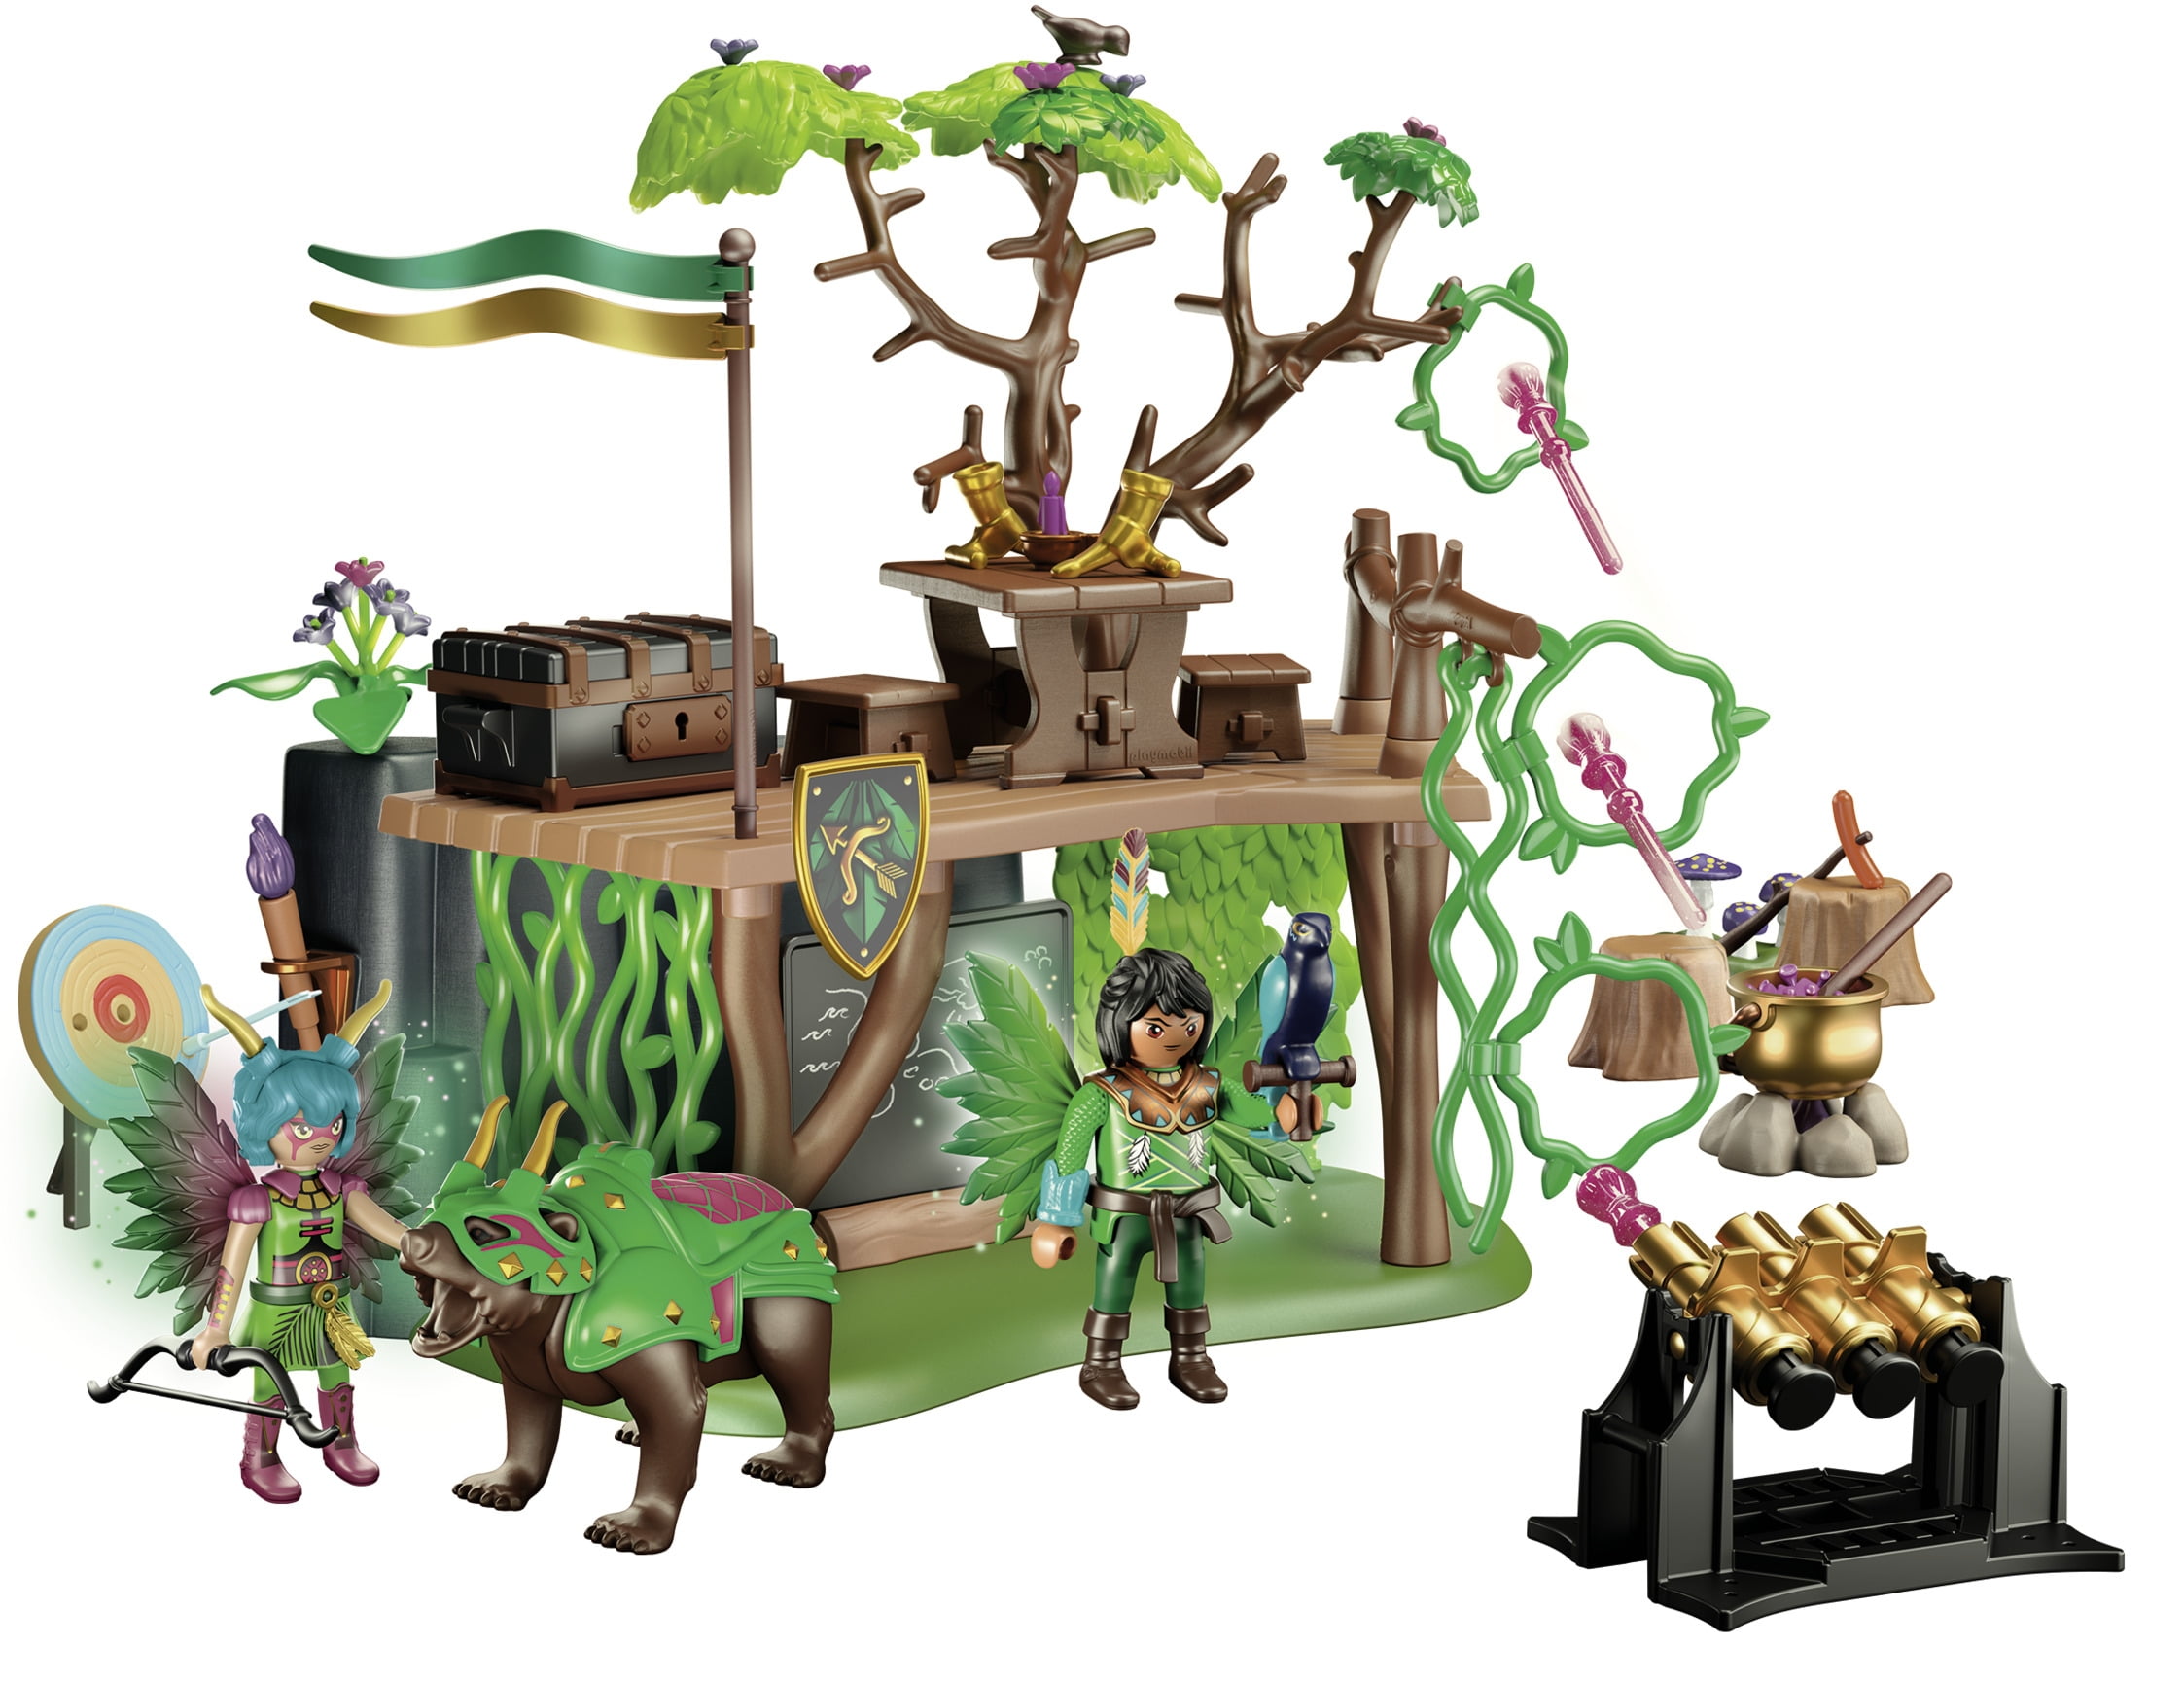 2021) 70804 Ayuma Forest Fairy with Tree Hut Playmobil REVIEW 